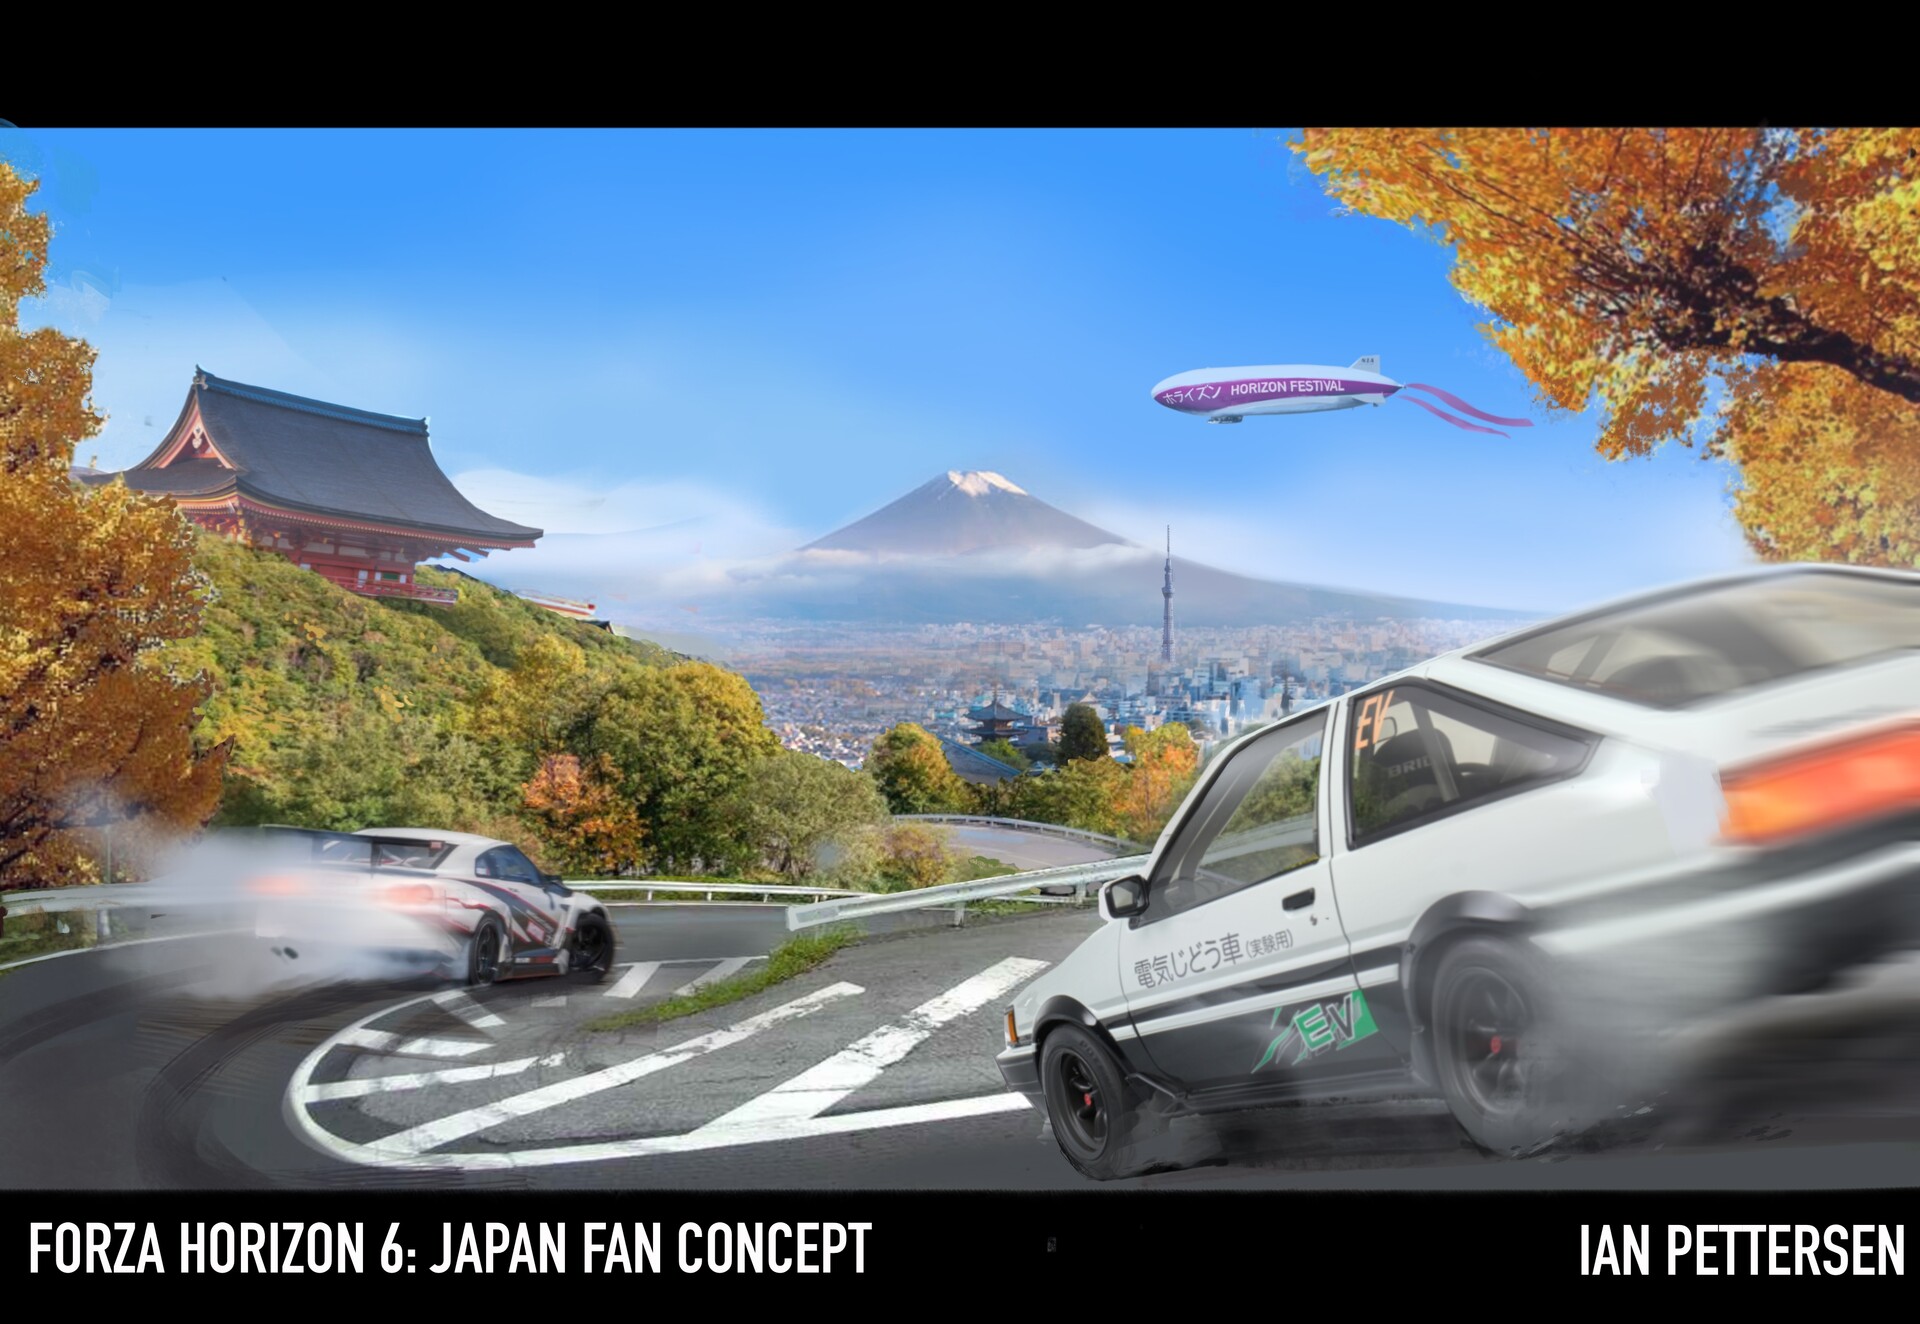 What country will Forza Horizon 6 be in?